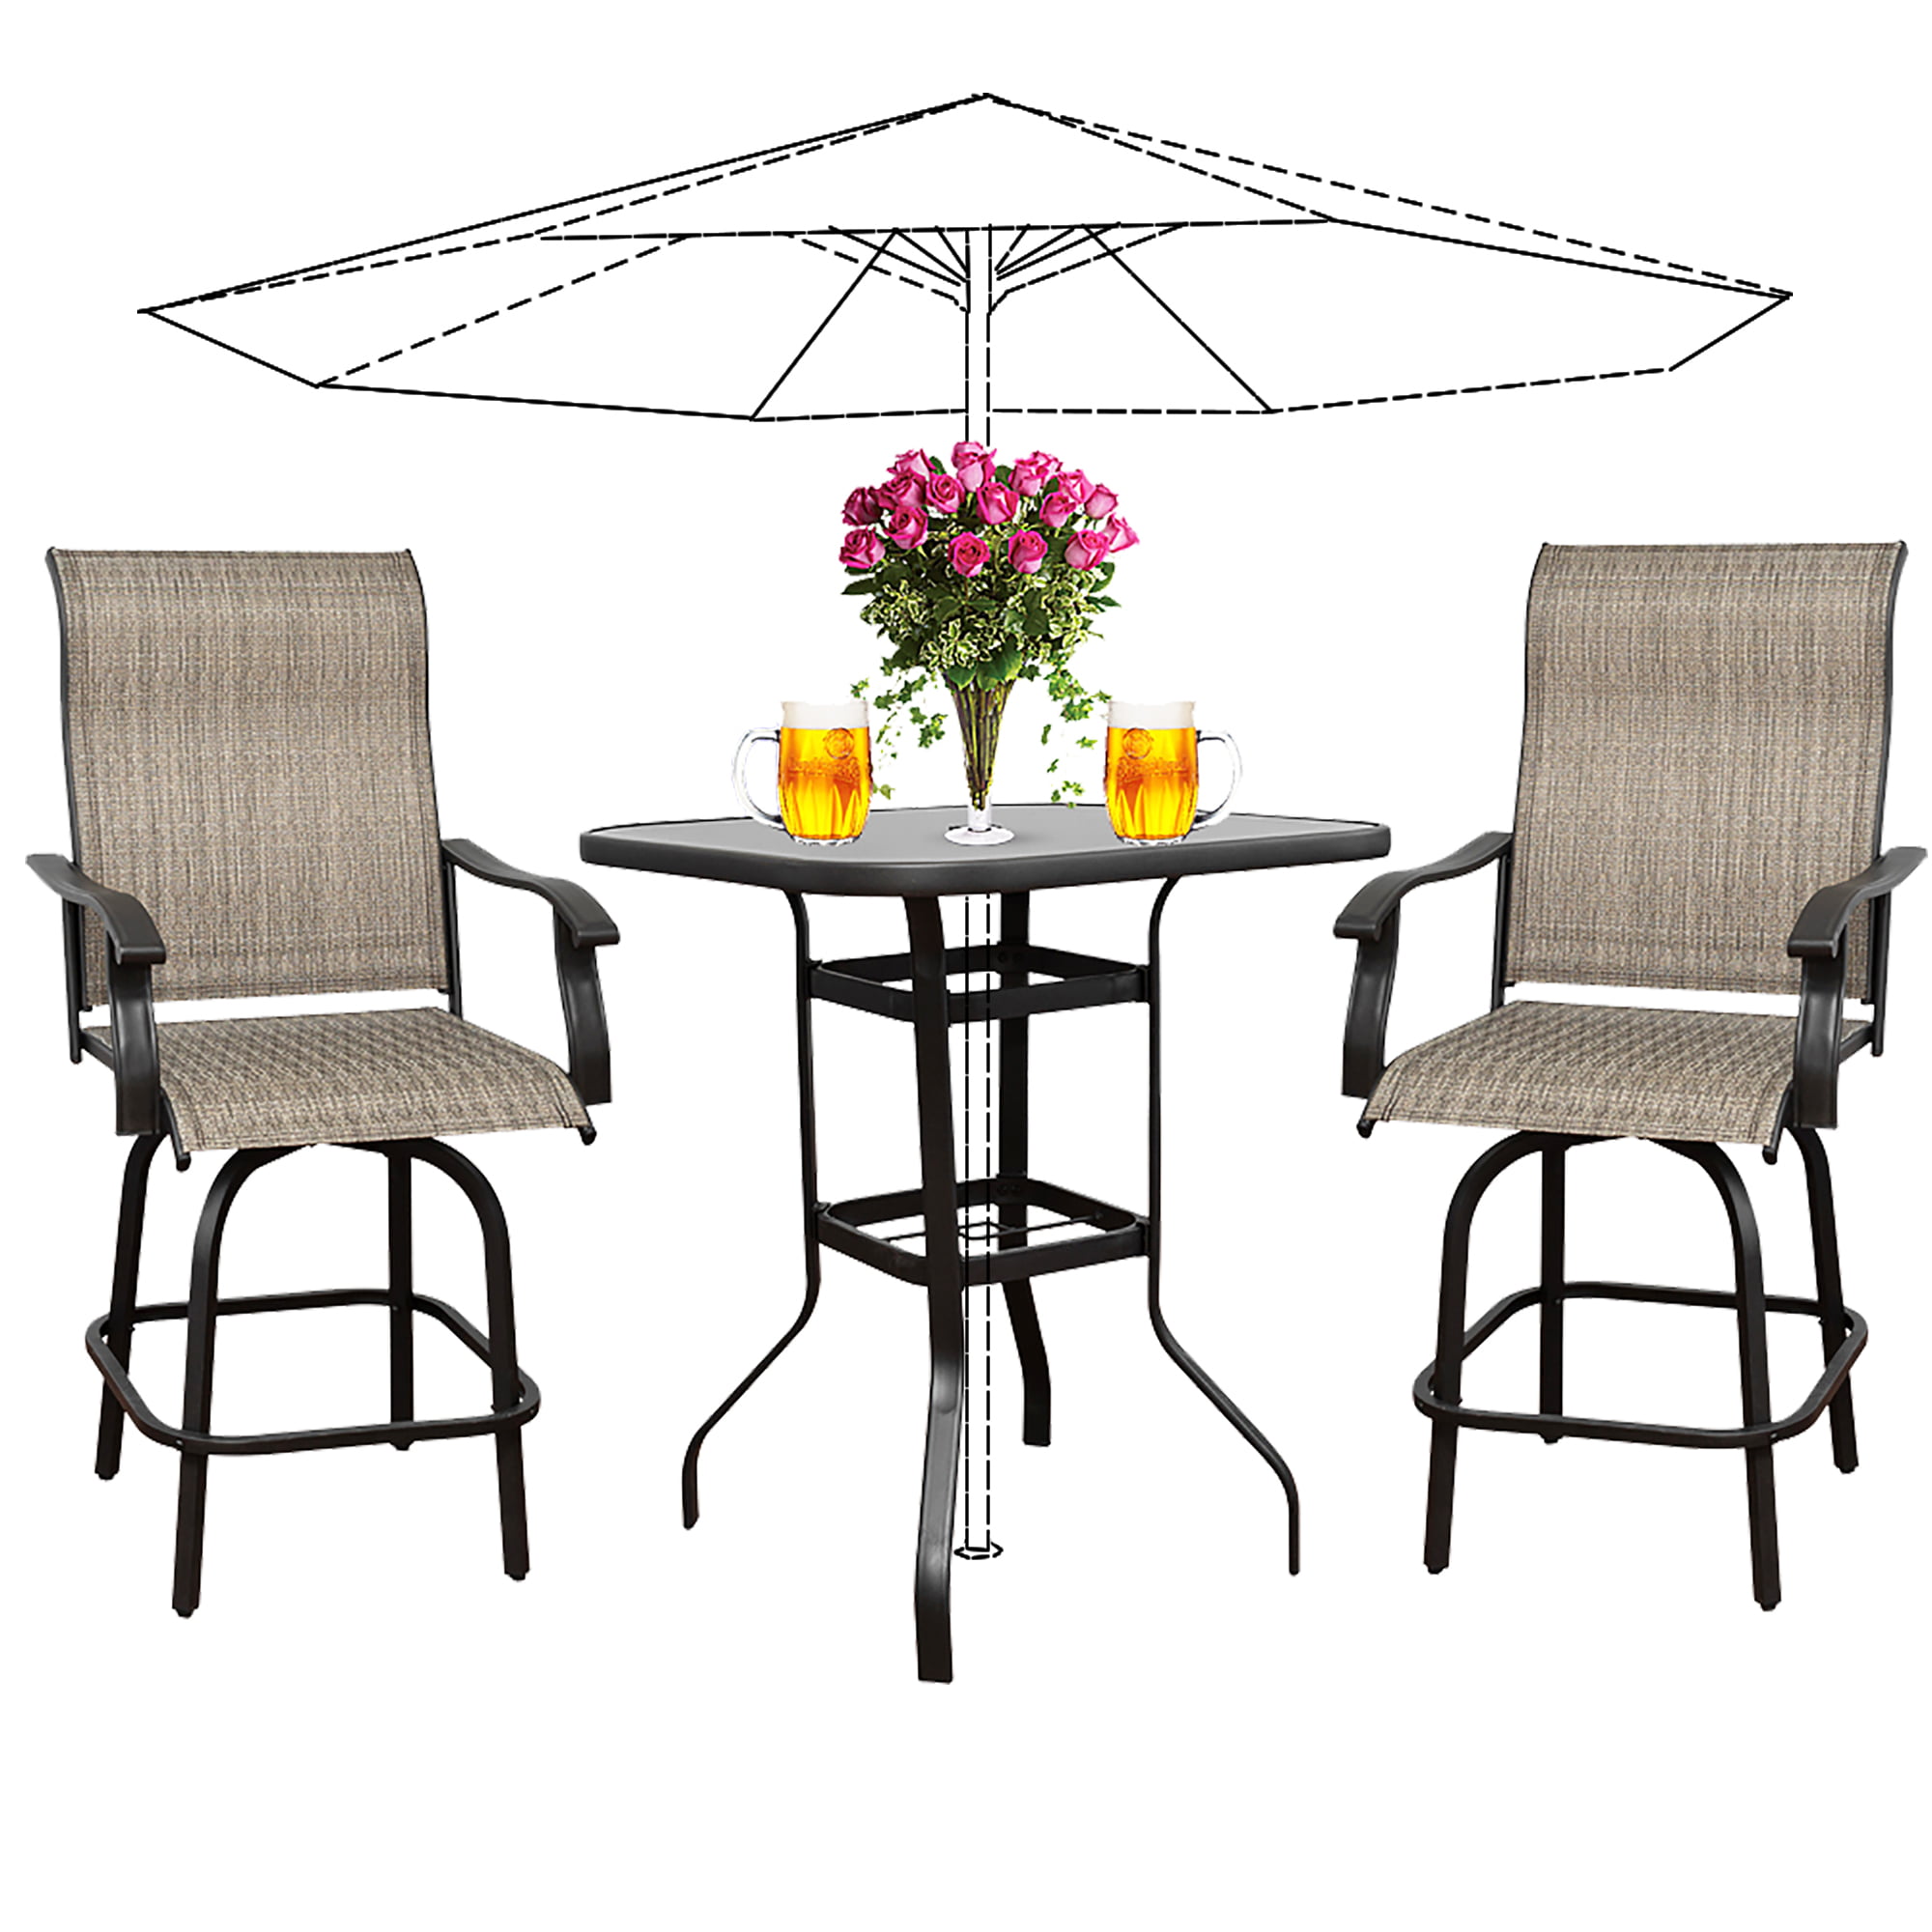 3PCS Patio 360 Swivel Bar Set All Weather Outdoor Furniture Height